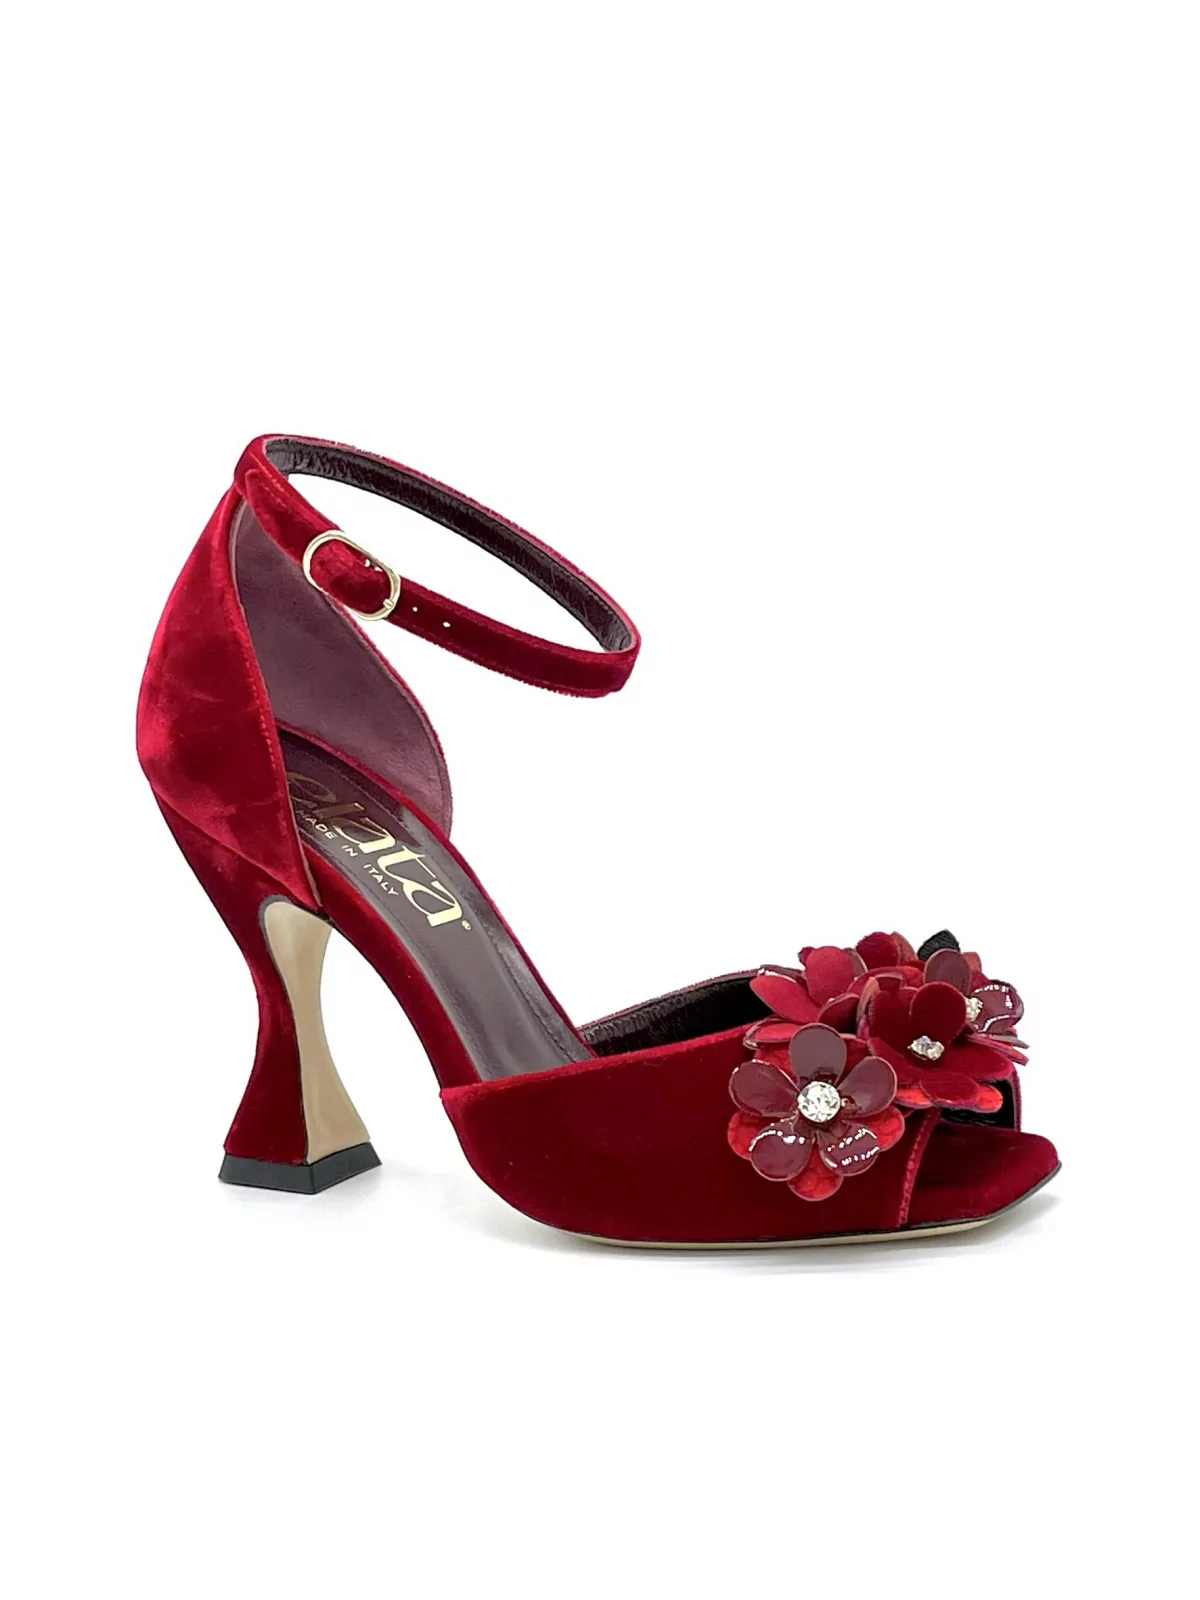 Red velvet sandal with red velvet and patent flower accessory with studs. Leathe